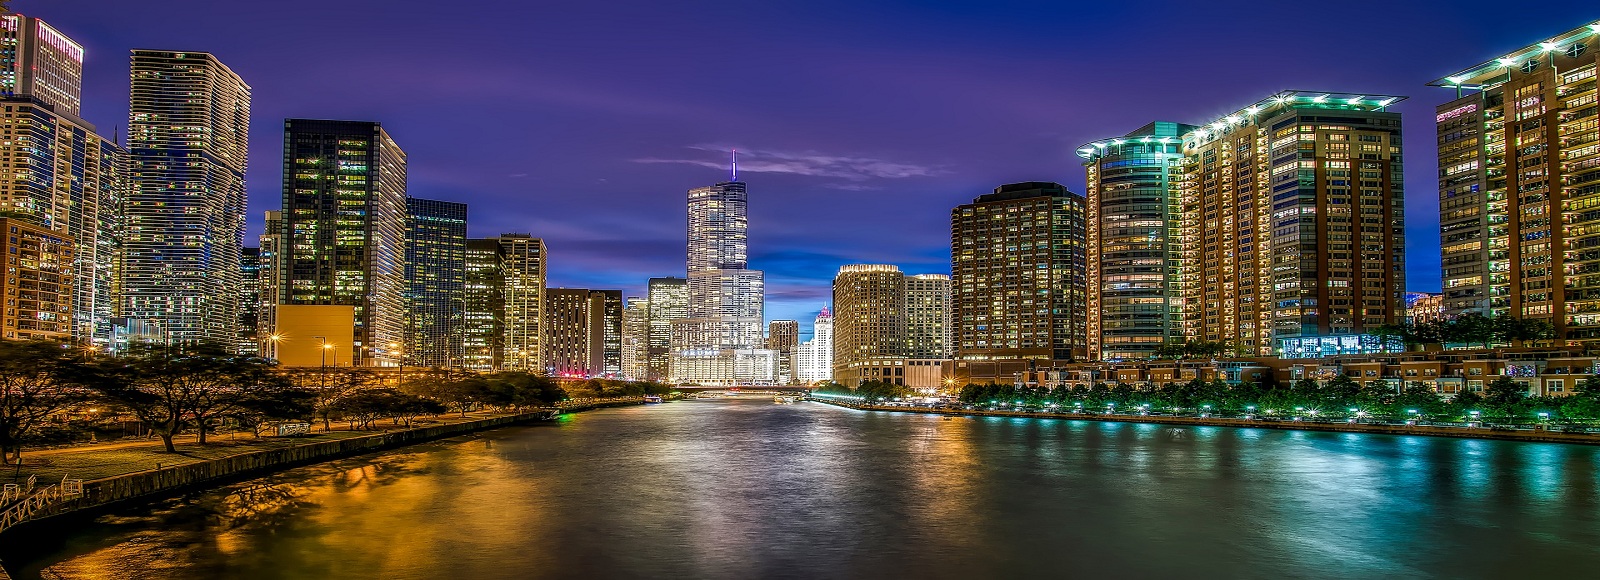 Transfer Offers in Chicago. Low Cost Transfers in  Chicago 